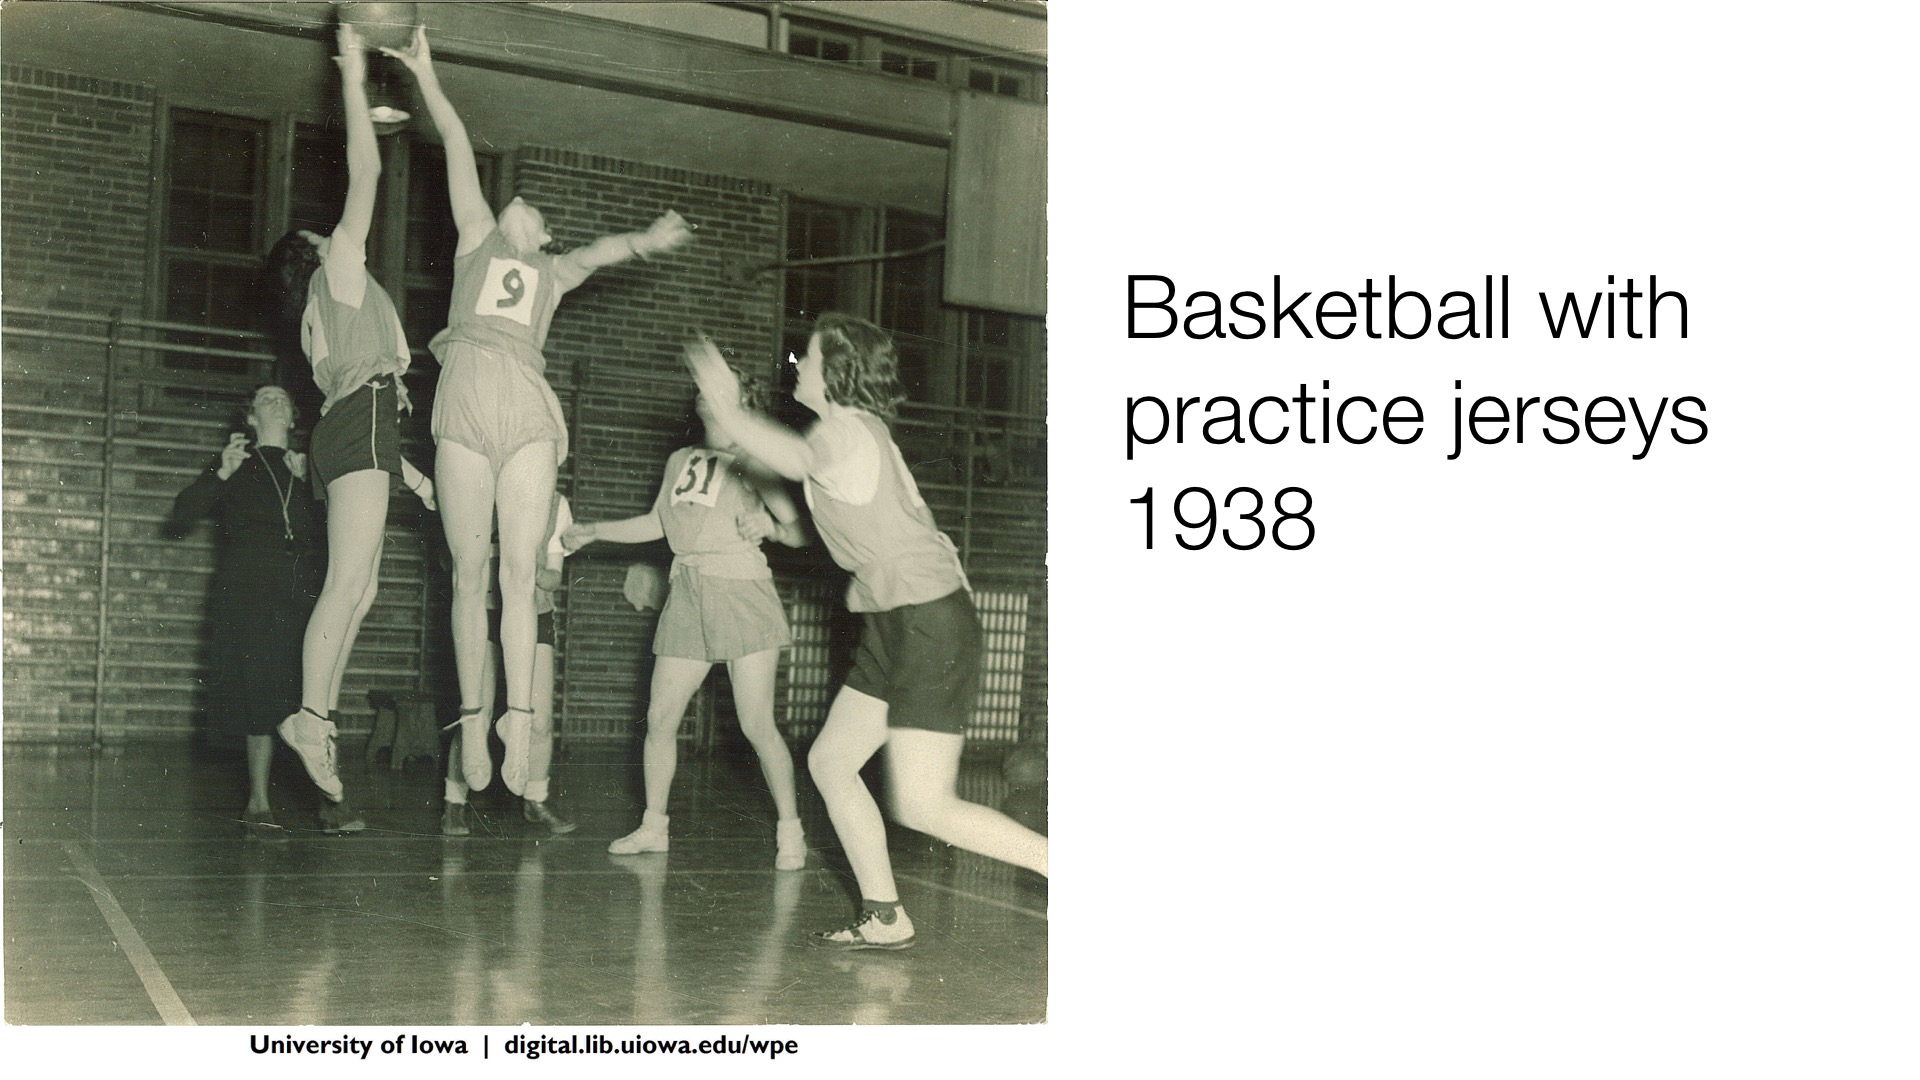 Basketball with practice jersey, 1938